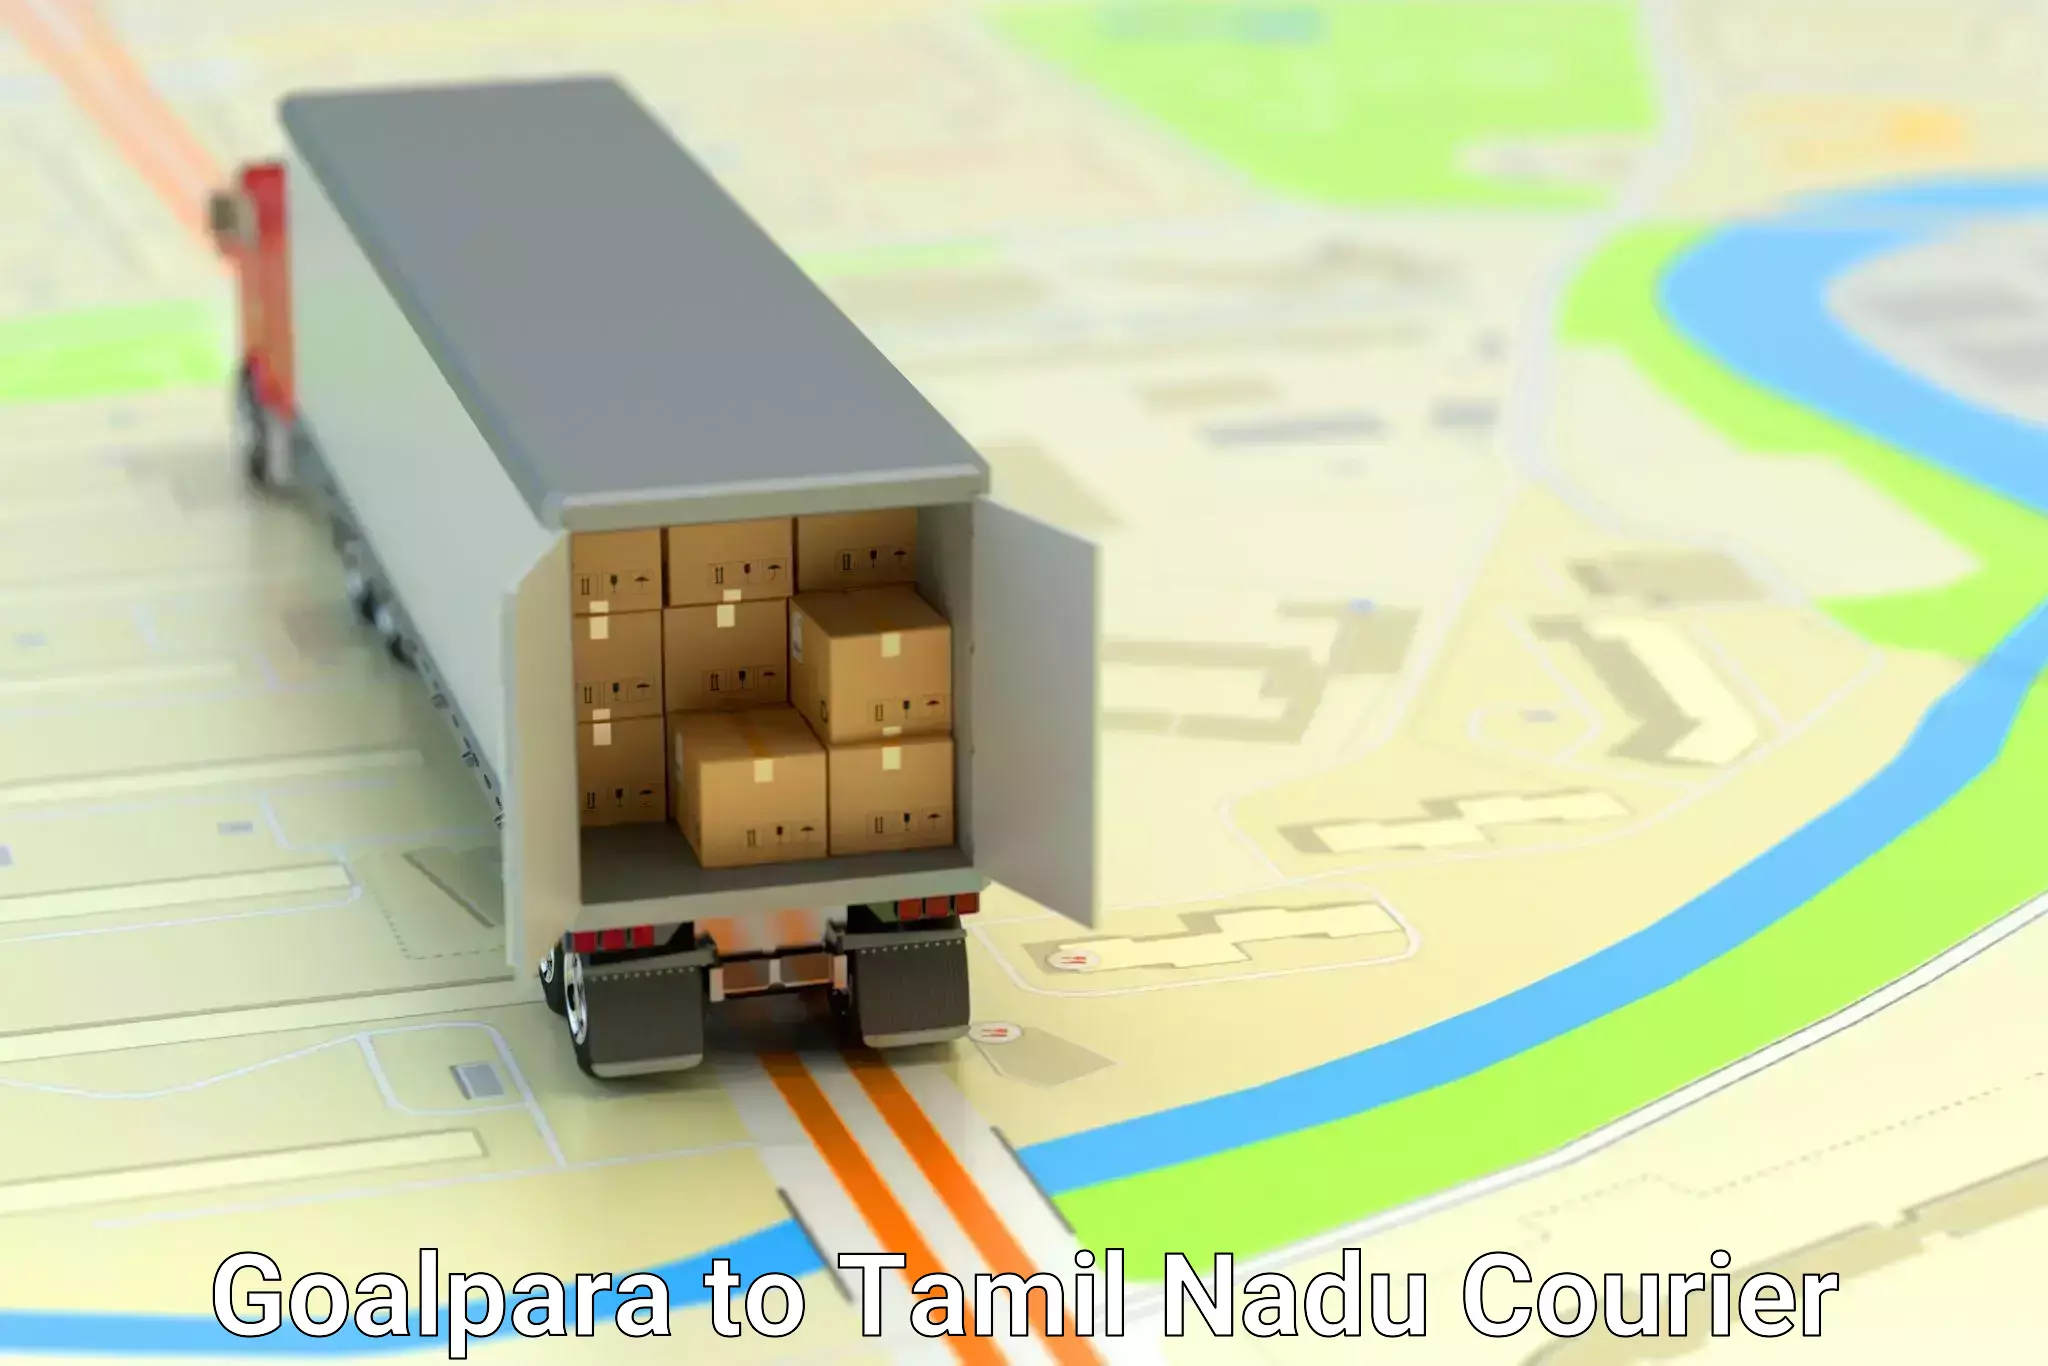 Package delivery network Goalpara to Ariyalur